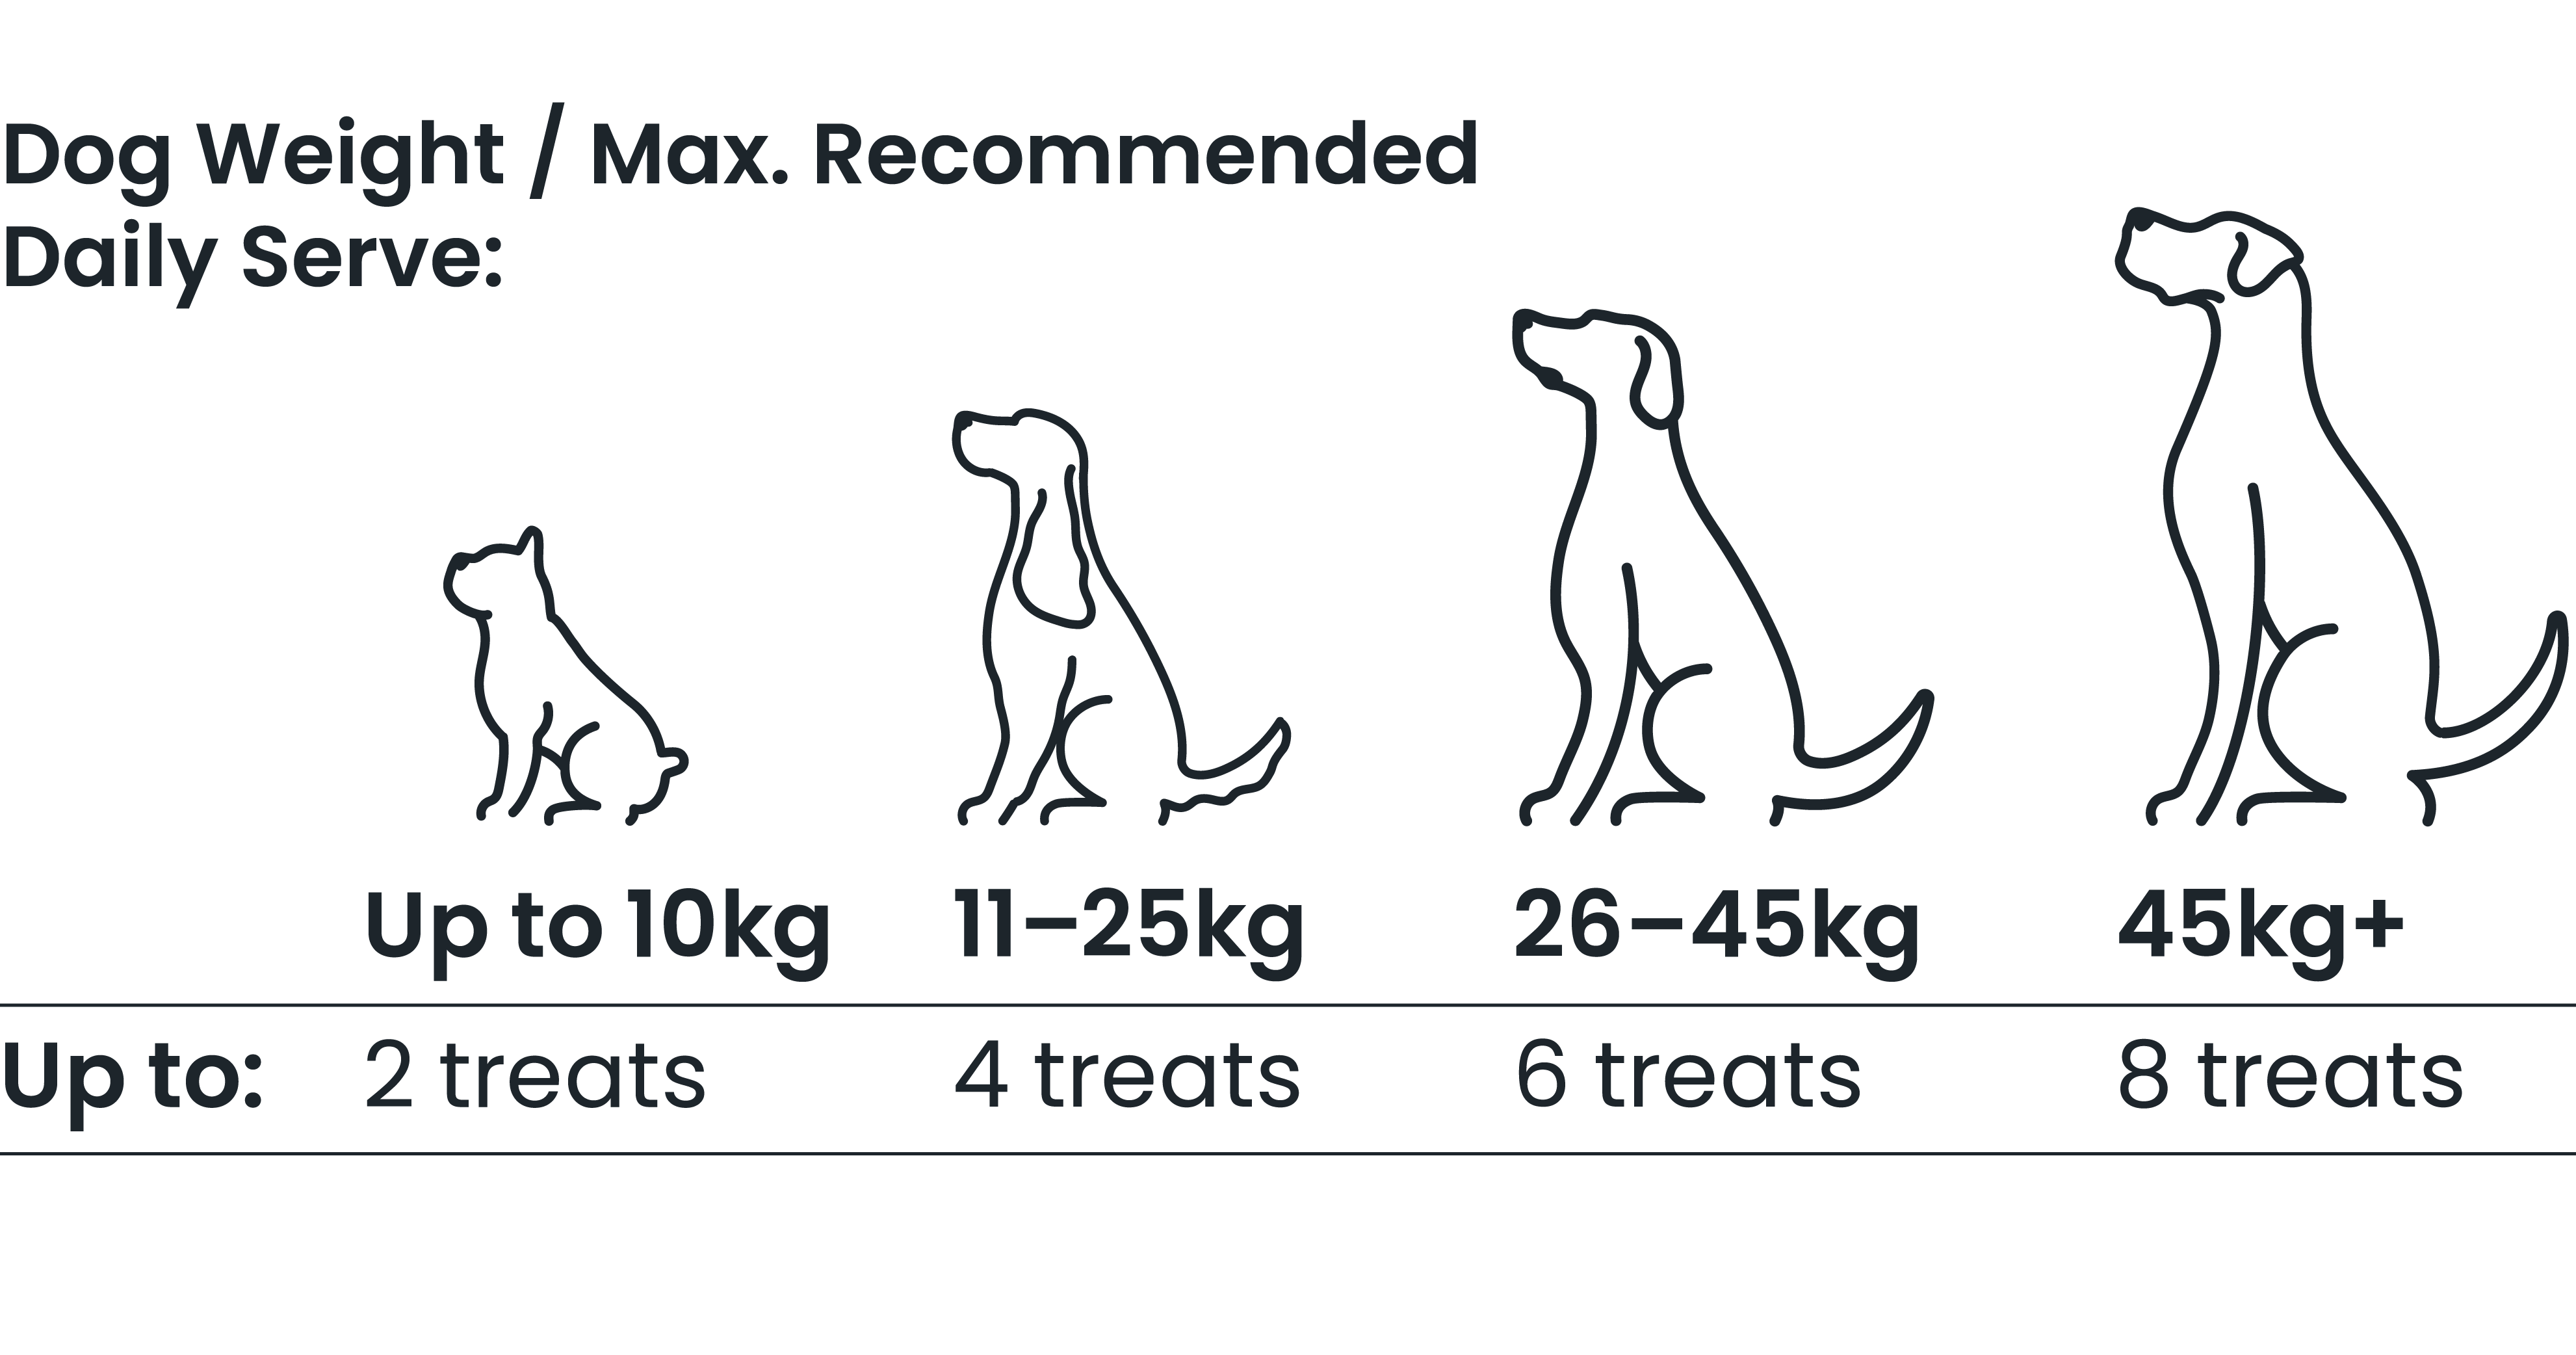 ZamiPet HappiTreats Relax &amp; Calm feeding guide. For dogs up to 10kg, max 2 treats per day. For 11kg-25kg dogs, up to 4 treats per day. For 26-45kg dogs, up to 6 treats per day. For dogs 45kg and over, up to 8 treats per day. 